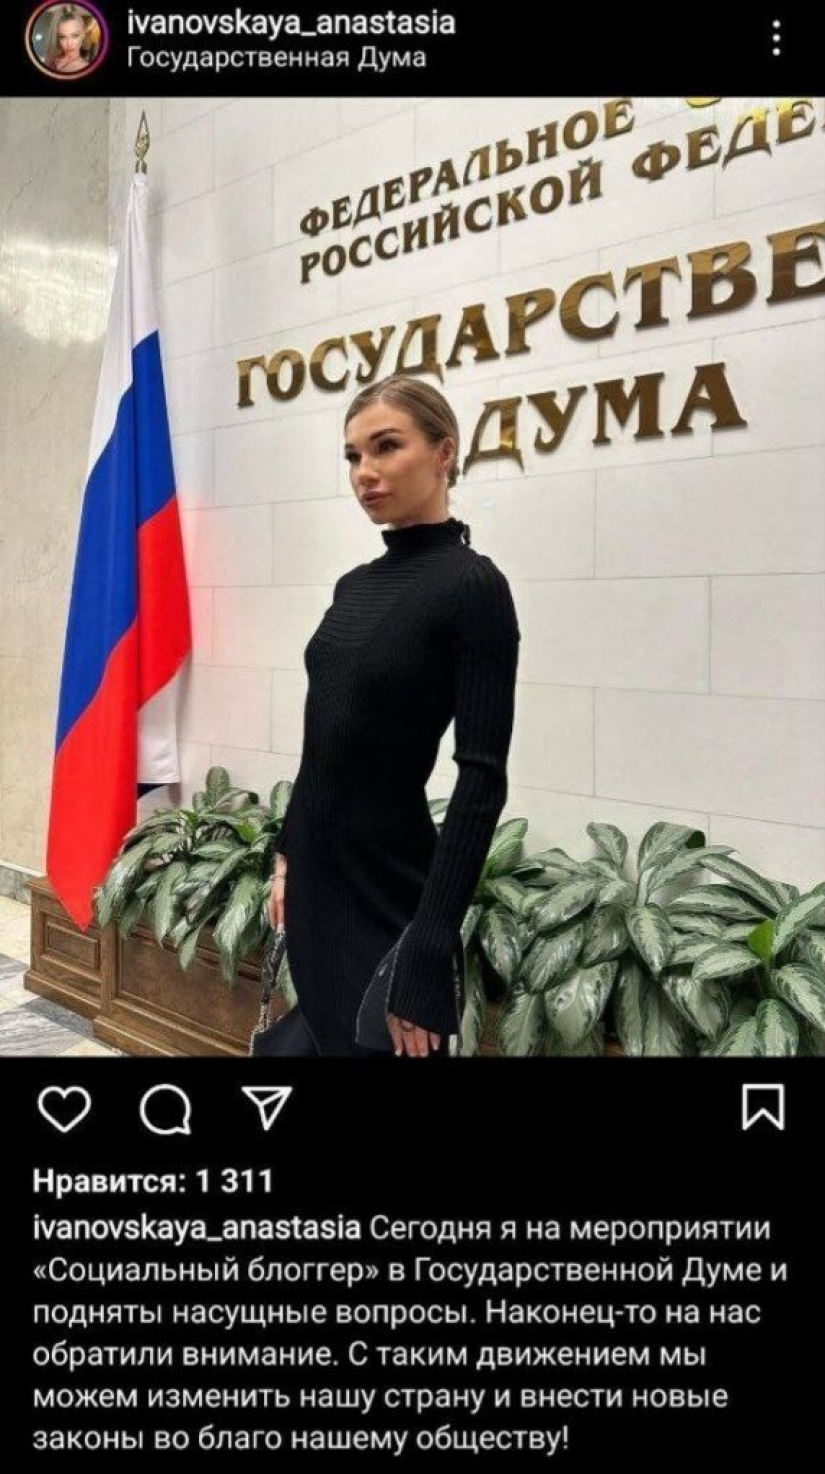 The network discusses the photo of the hot expert of the event "Social blogger" in the Duma